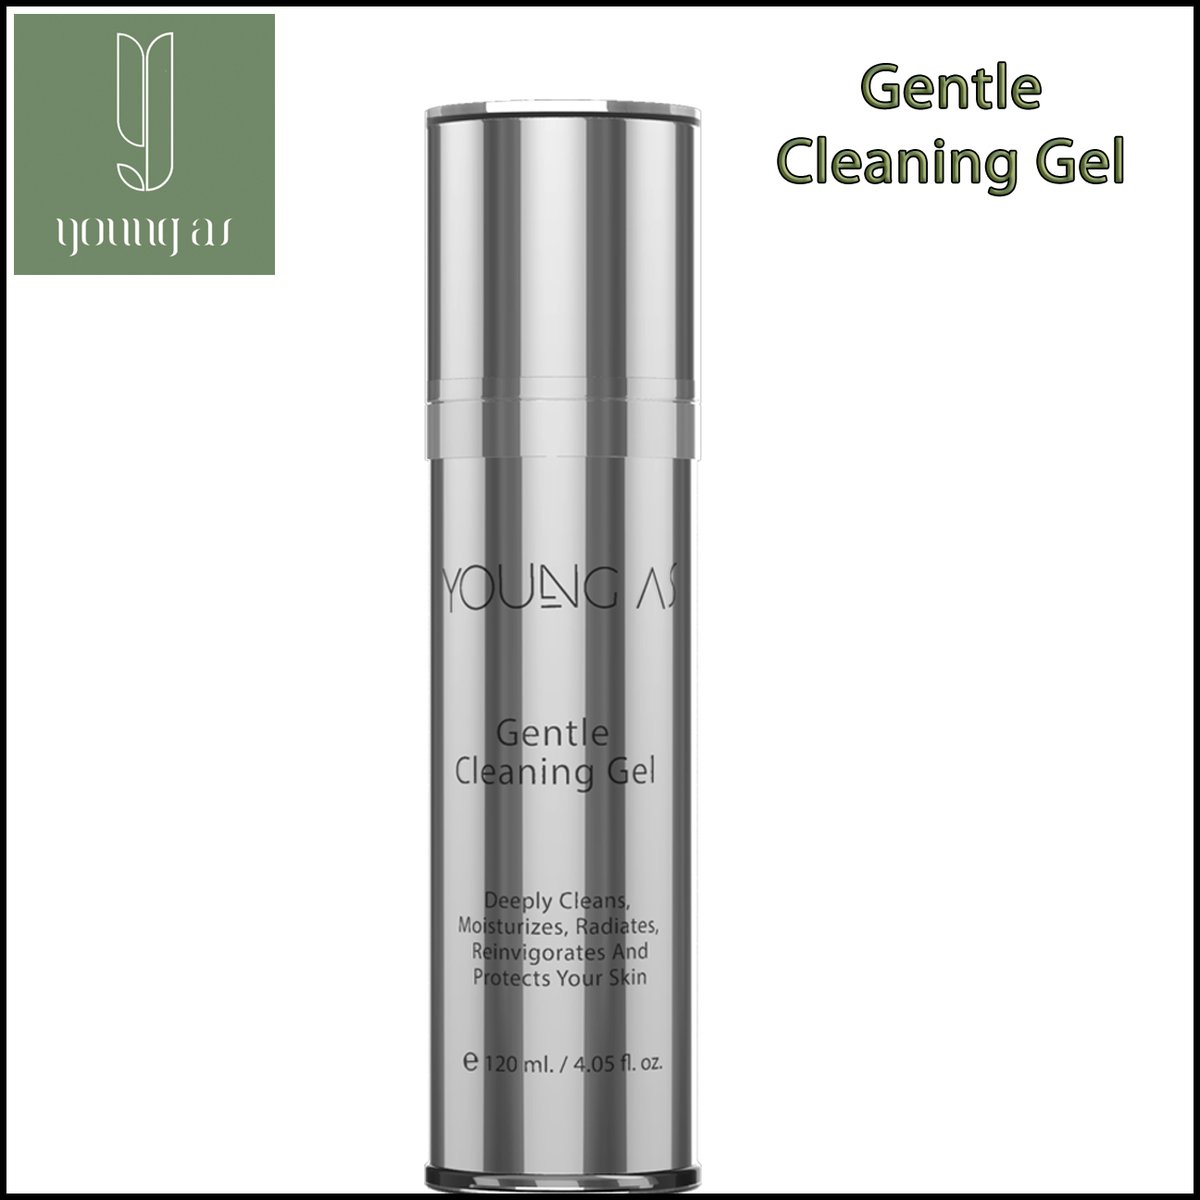 Gentle Cleaning Gel
YOUNG AS gentle face cleanser moisturizes and protects your skin with YOUNG AS revolutionary cleansing technology.

#youngas #skincare # cleaninggel #facecleanser #makeupremover #antipollution #dehydration